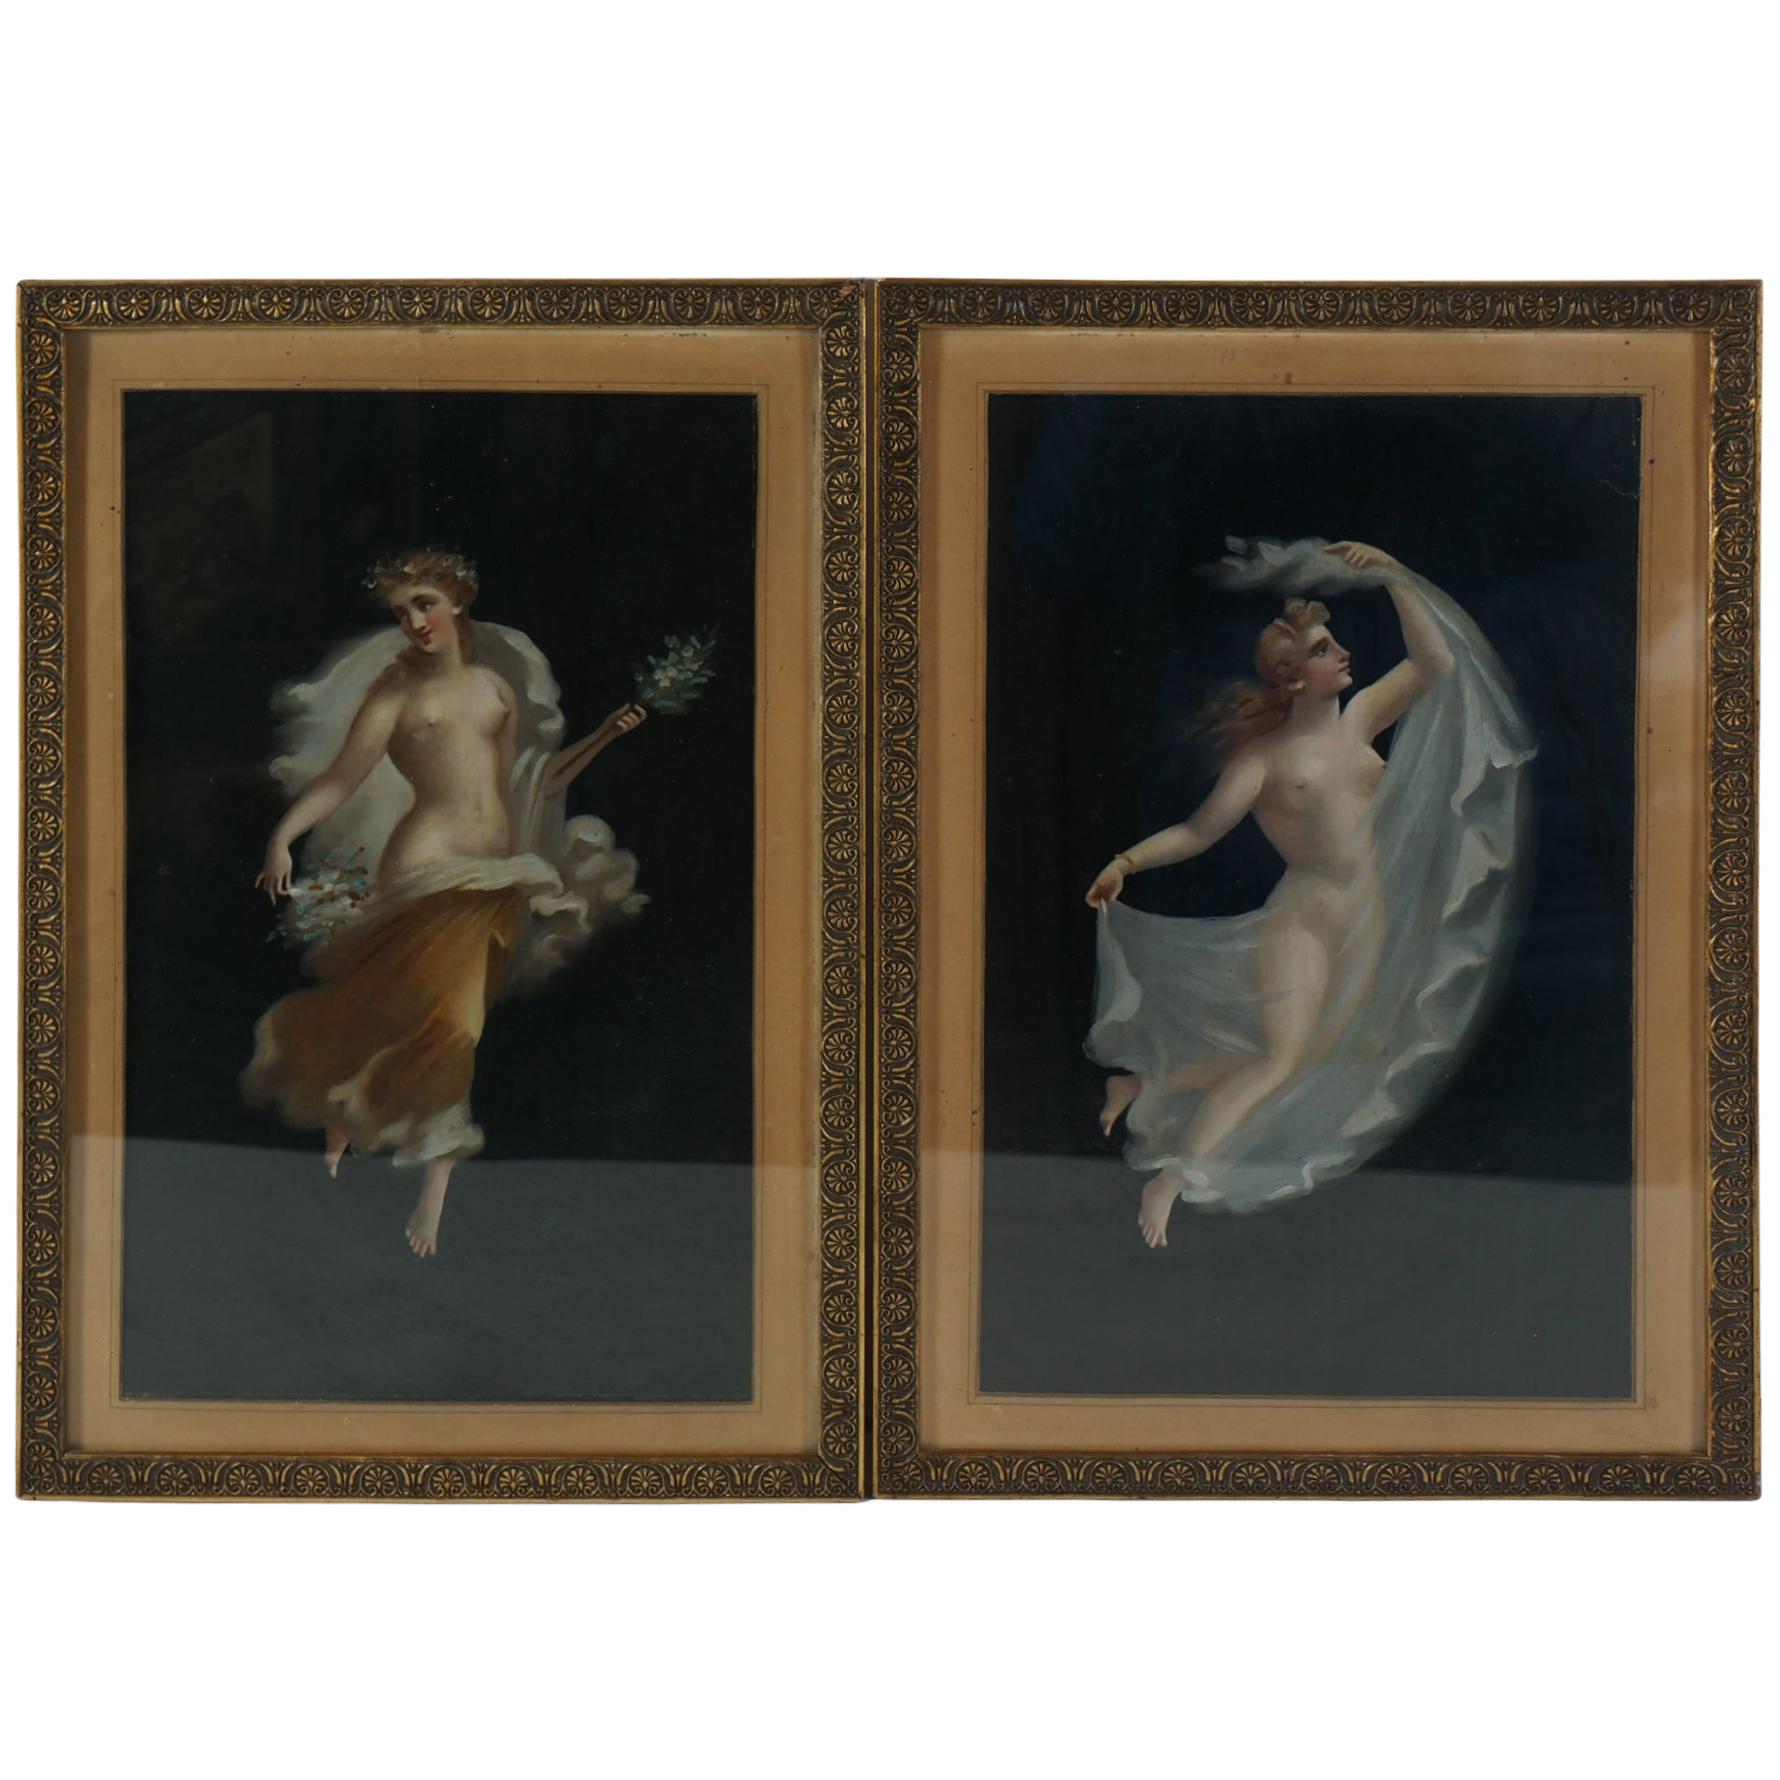 Two 19th Century Oil on Board Paintings After Pompeian Fresco